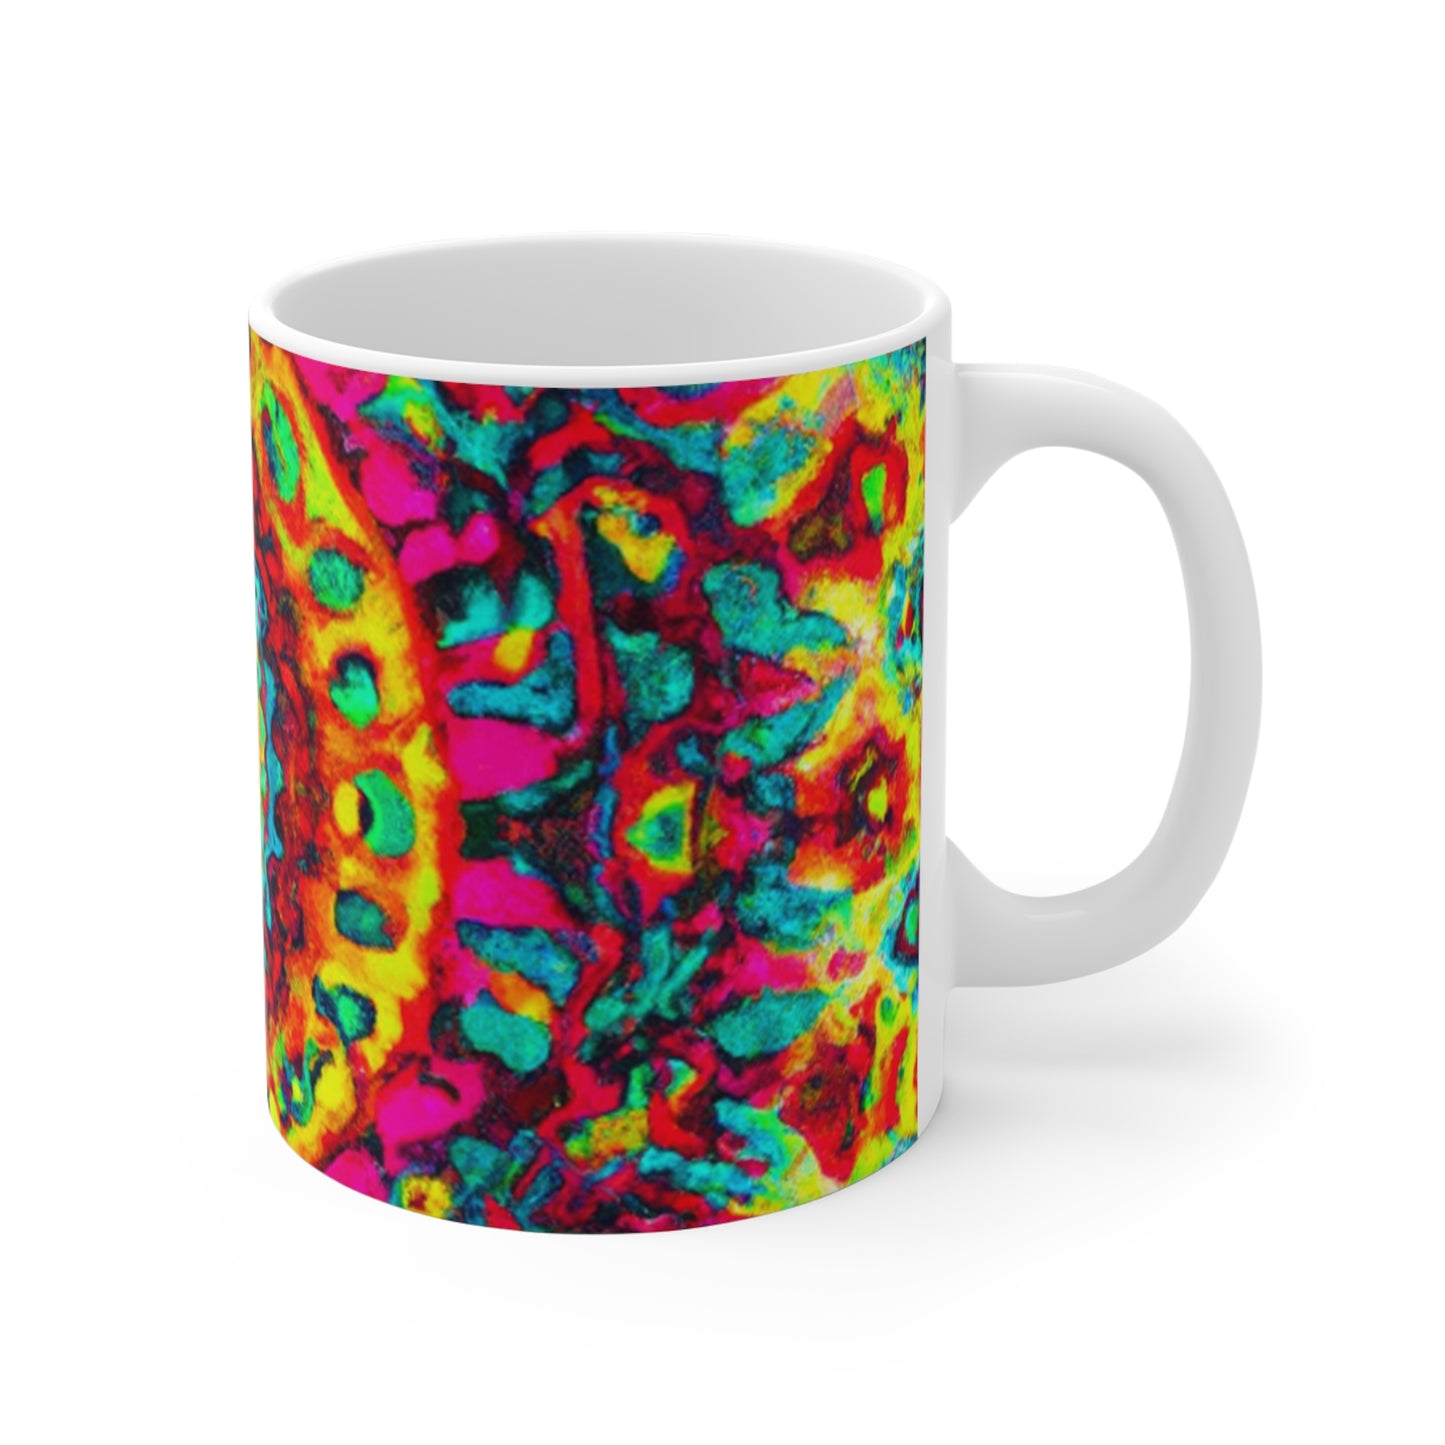 Clyde's Coffees - Psychedelic Coffee Cup Mug 11 Ounce